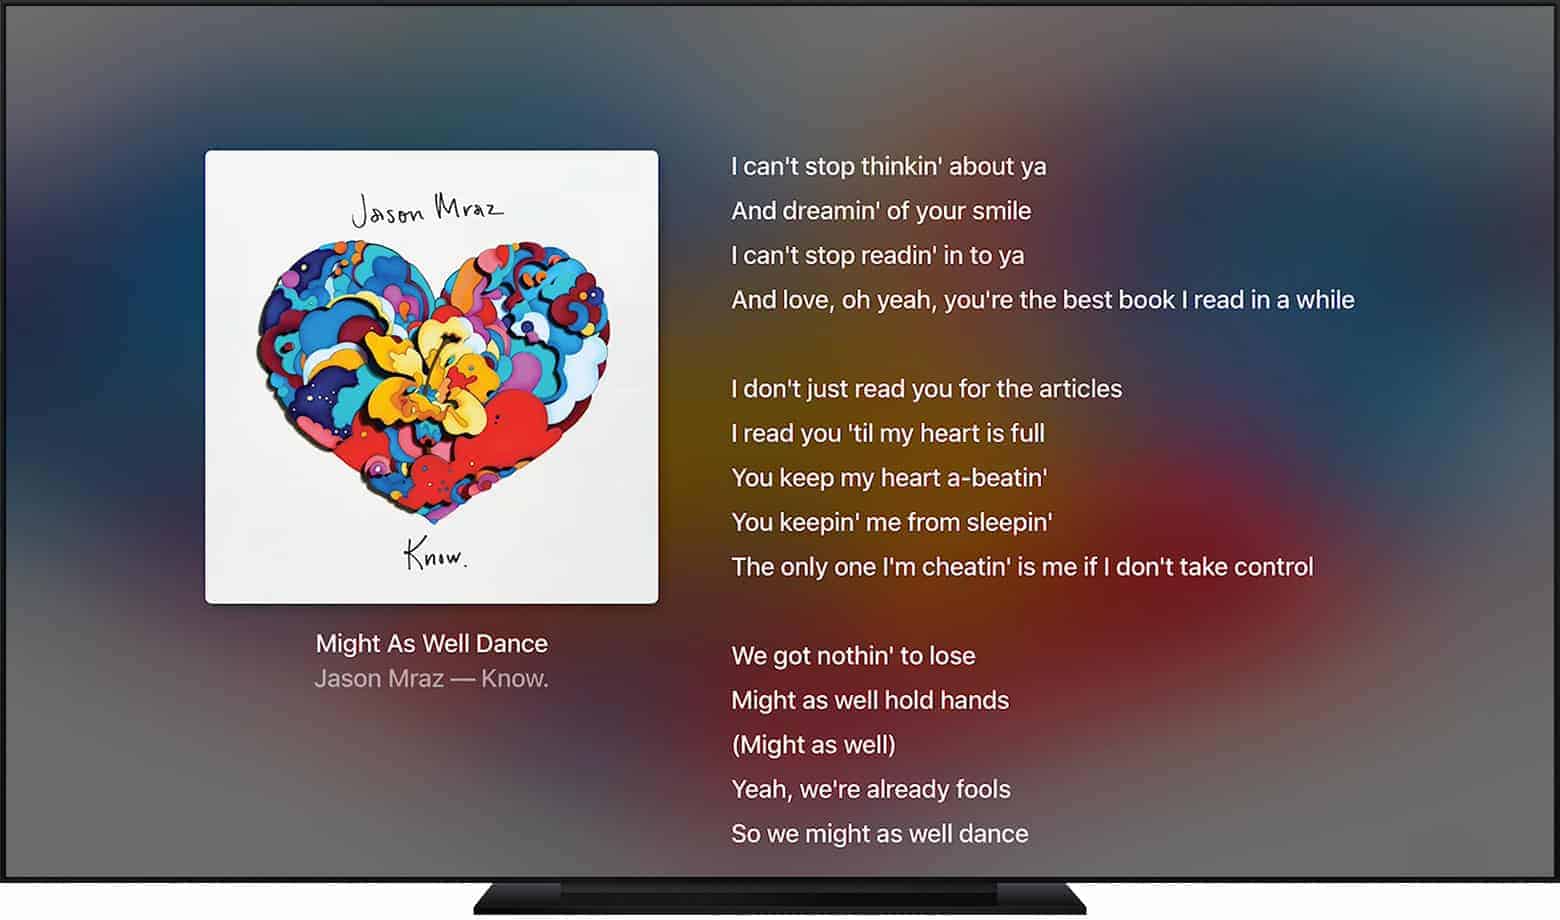 Apple Music Expands Song Lyrics Support High Resolution Audio